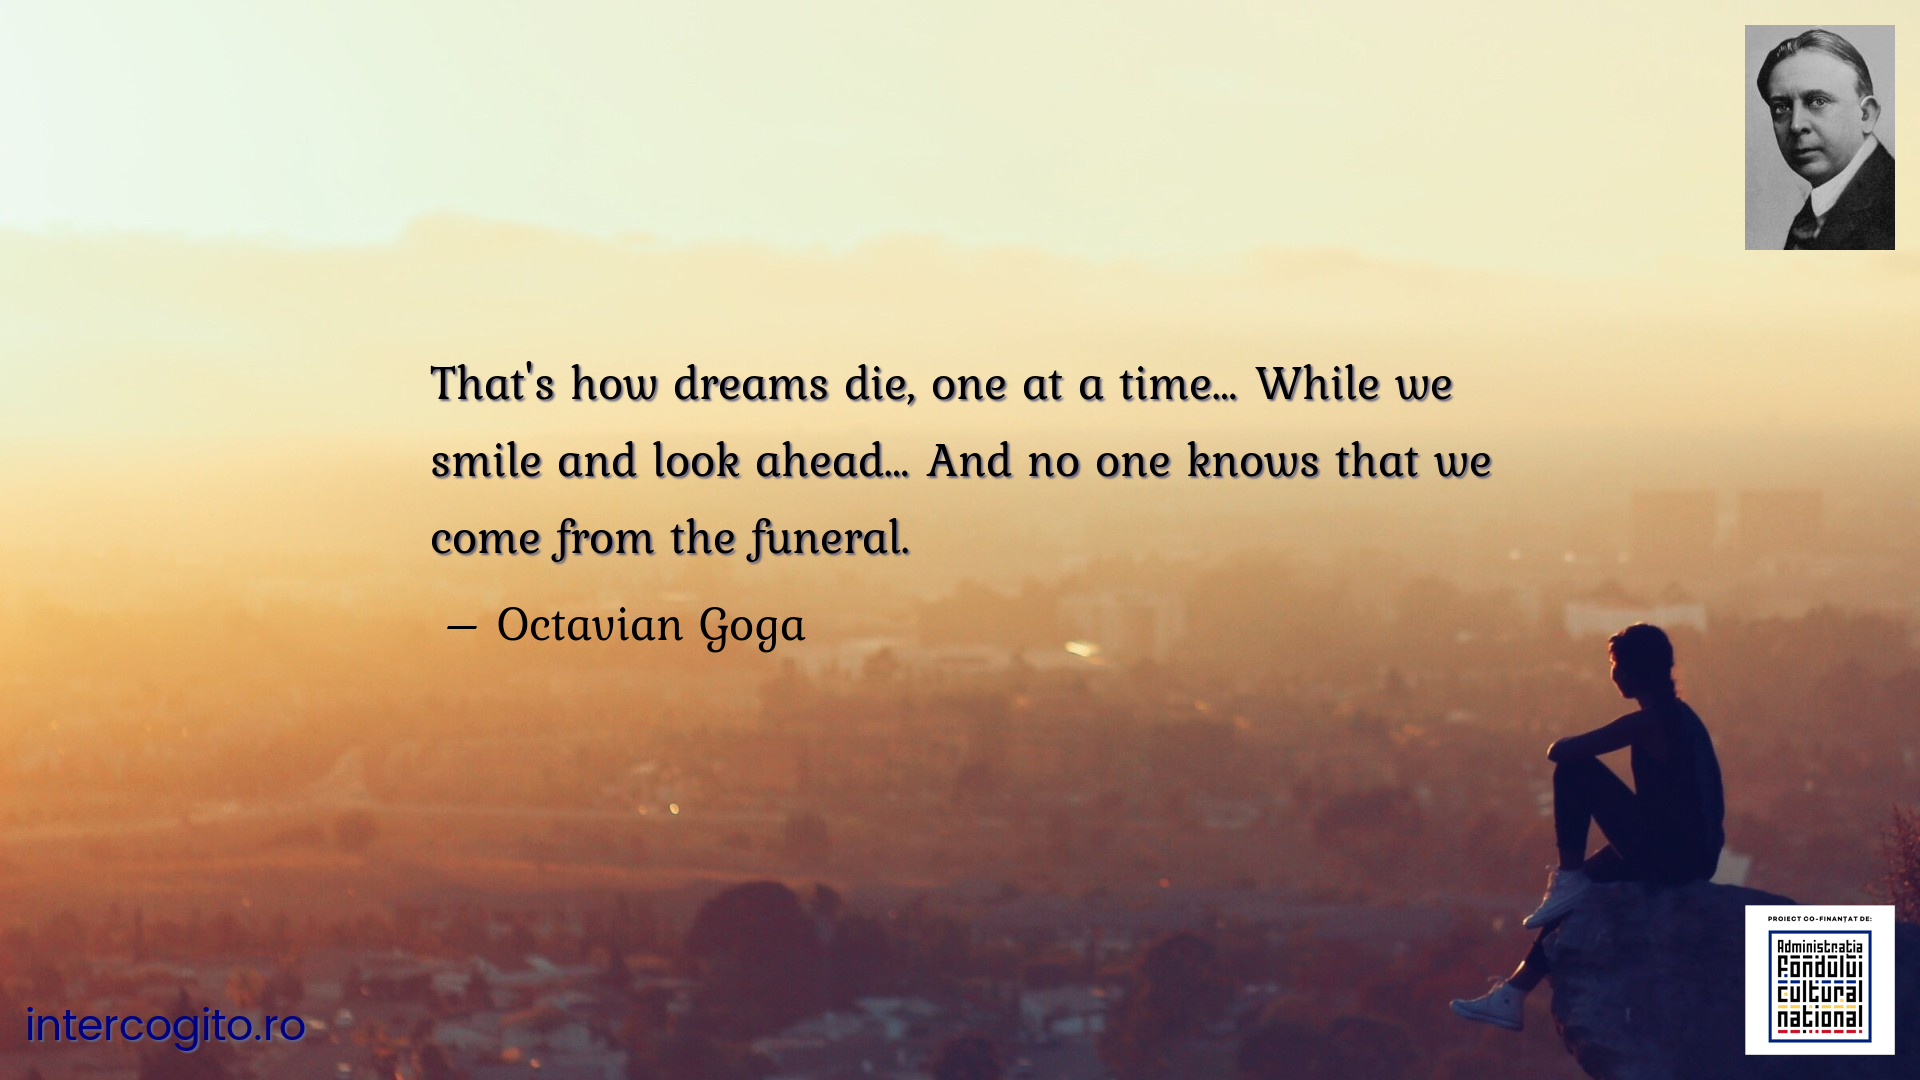 That's how dreams die, one at a time… While we smile and look ahead… And no one knows that we come from the funeral.